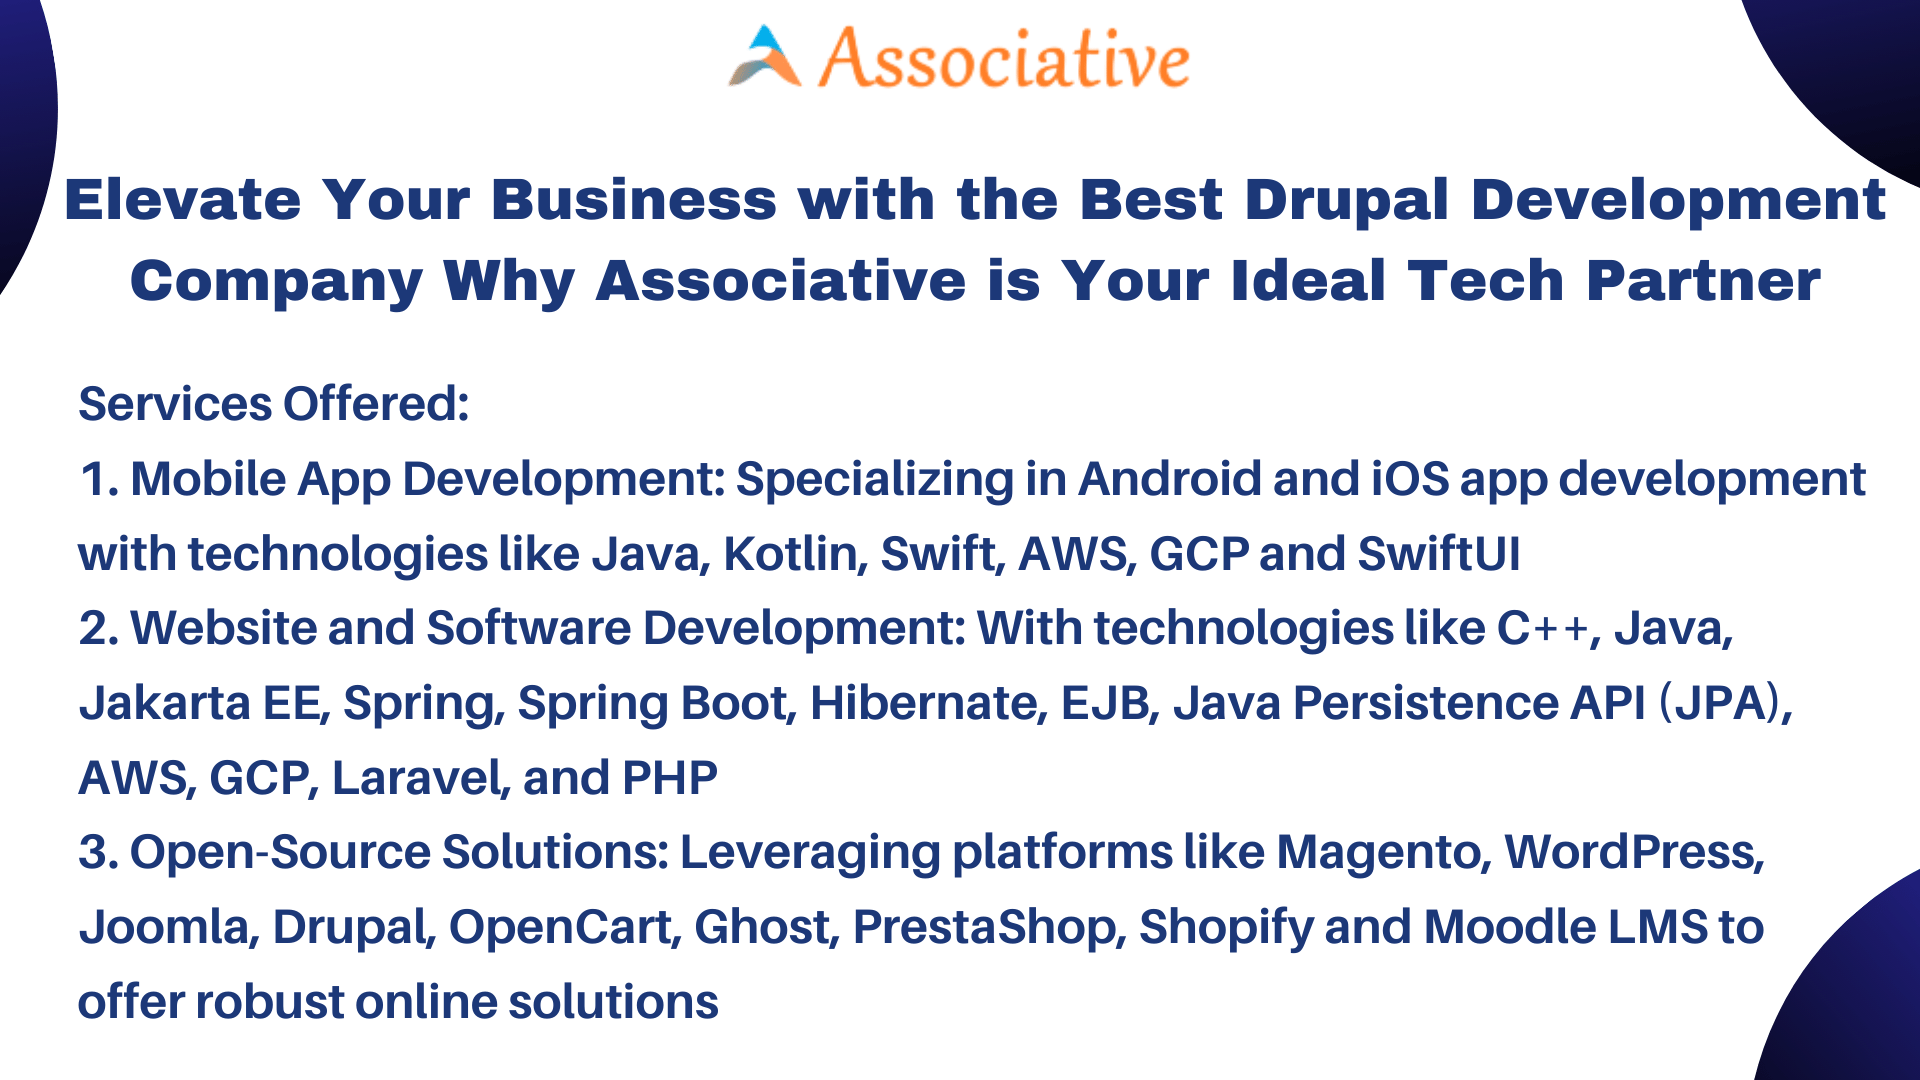 Elevate Your Business with the Best Drupal Development Company Why Associative is Your Ideal Tech Partner